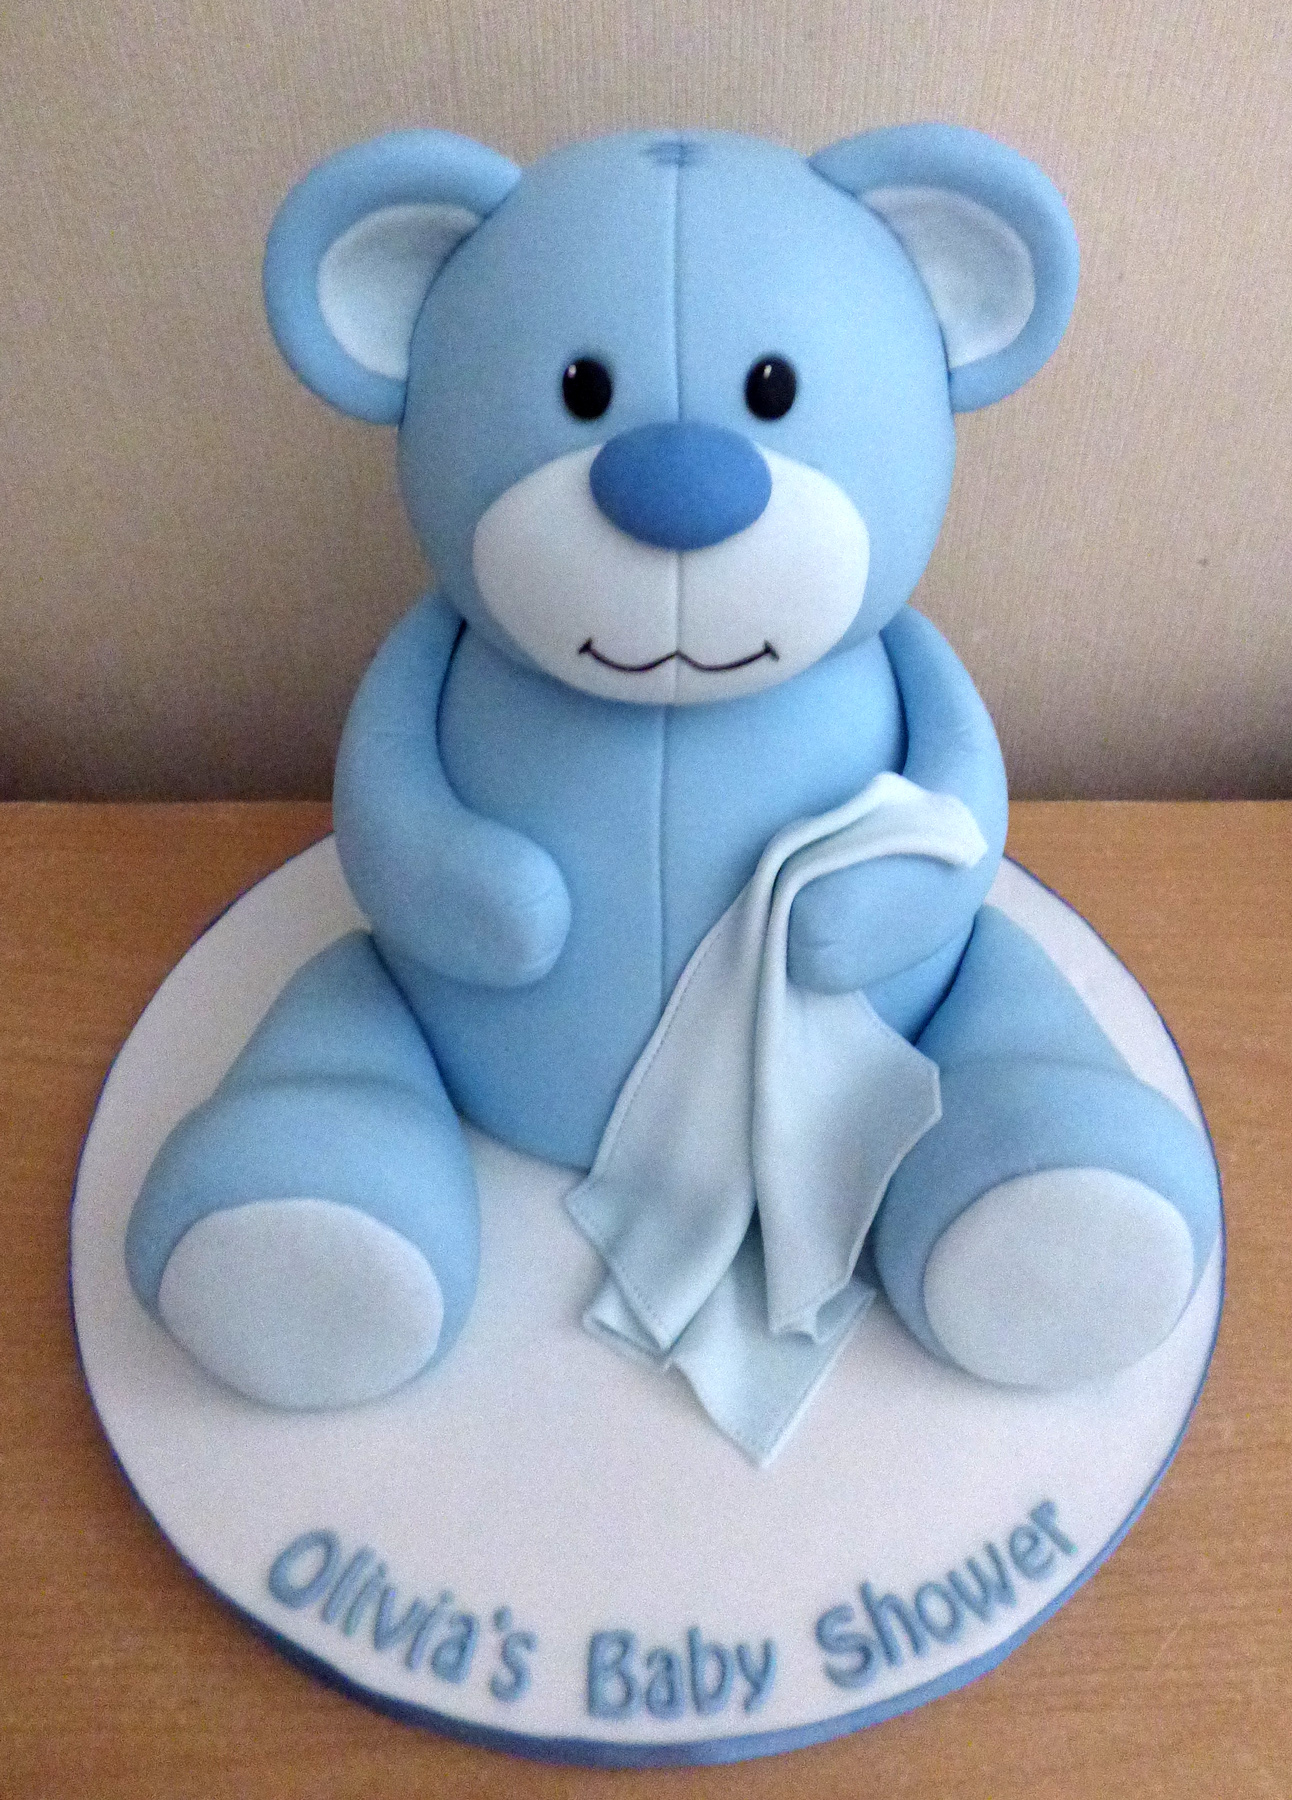 Teddy Bear Baby Shower white Cake -Oh Baby- 1 bear & Spheres-2 Tiers Cake –  Pao's cakes